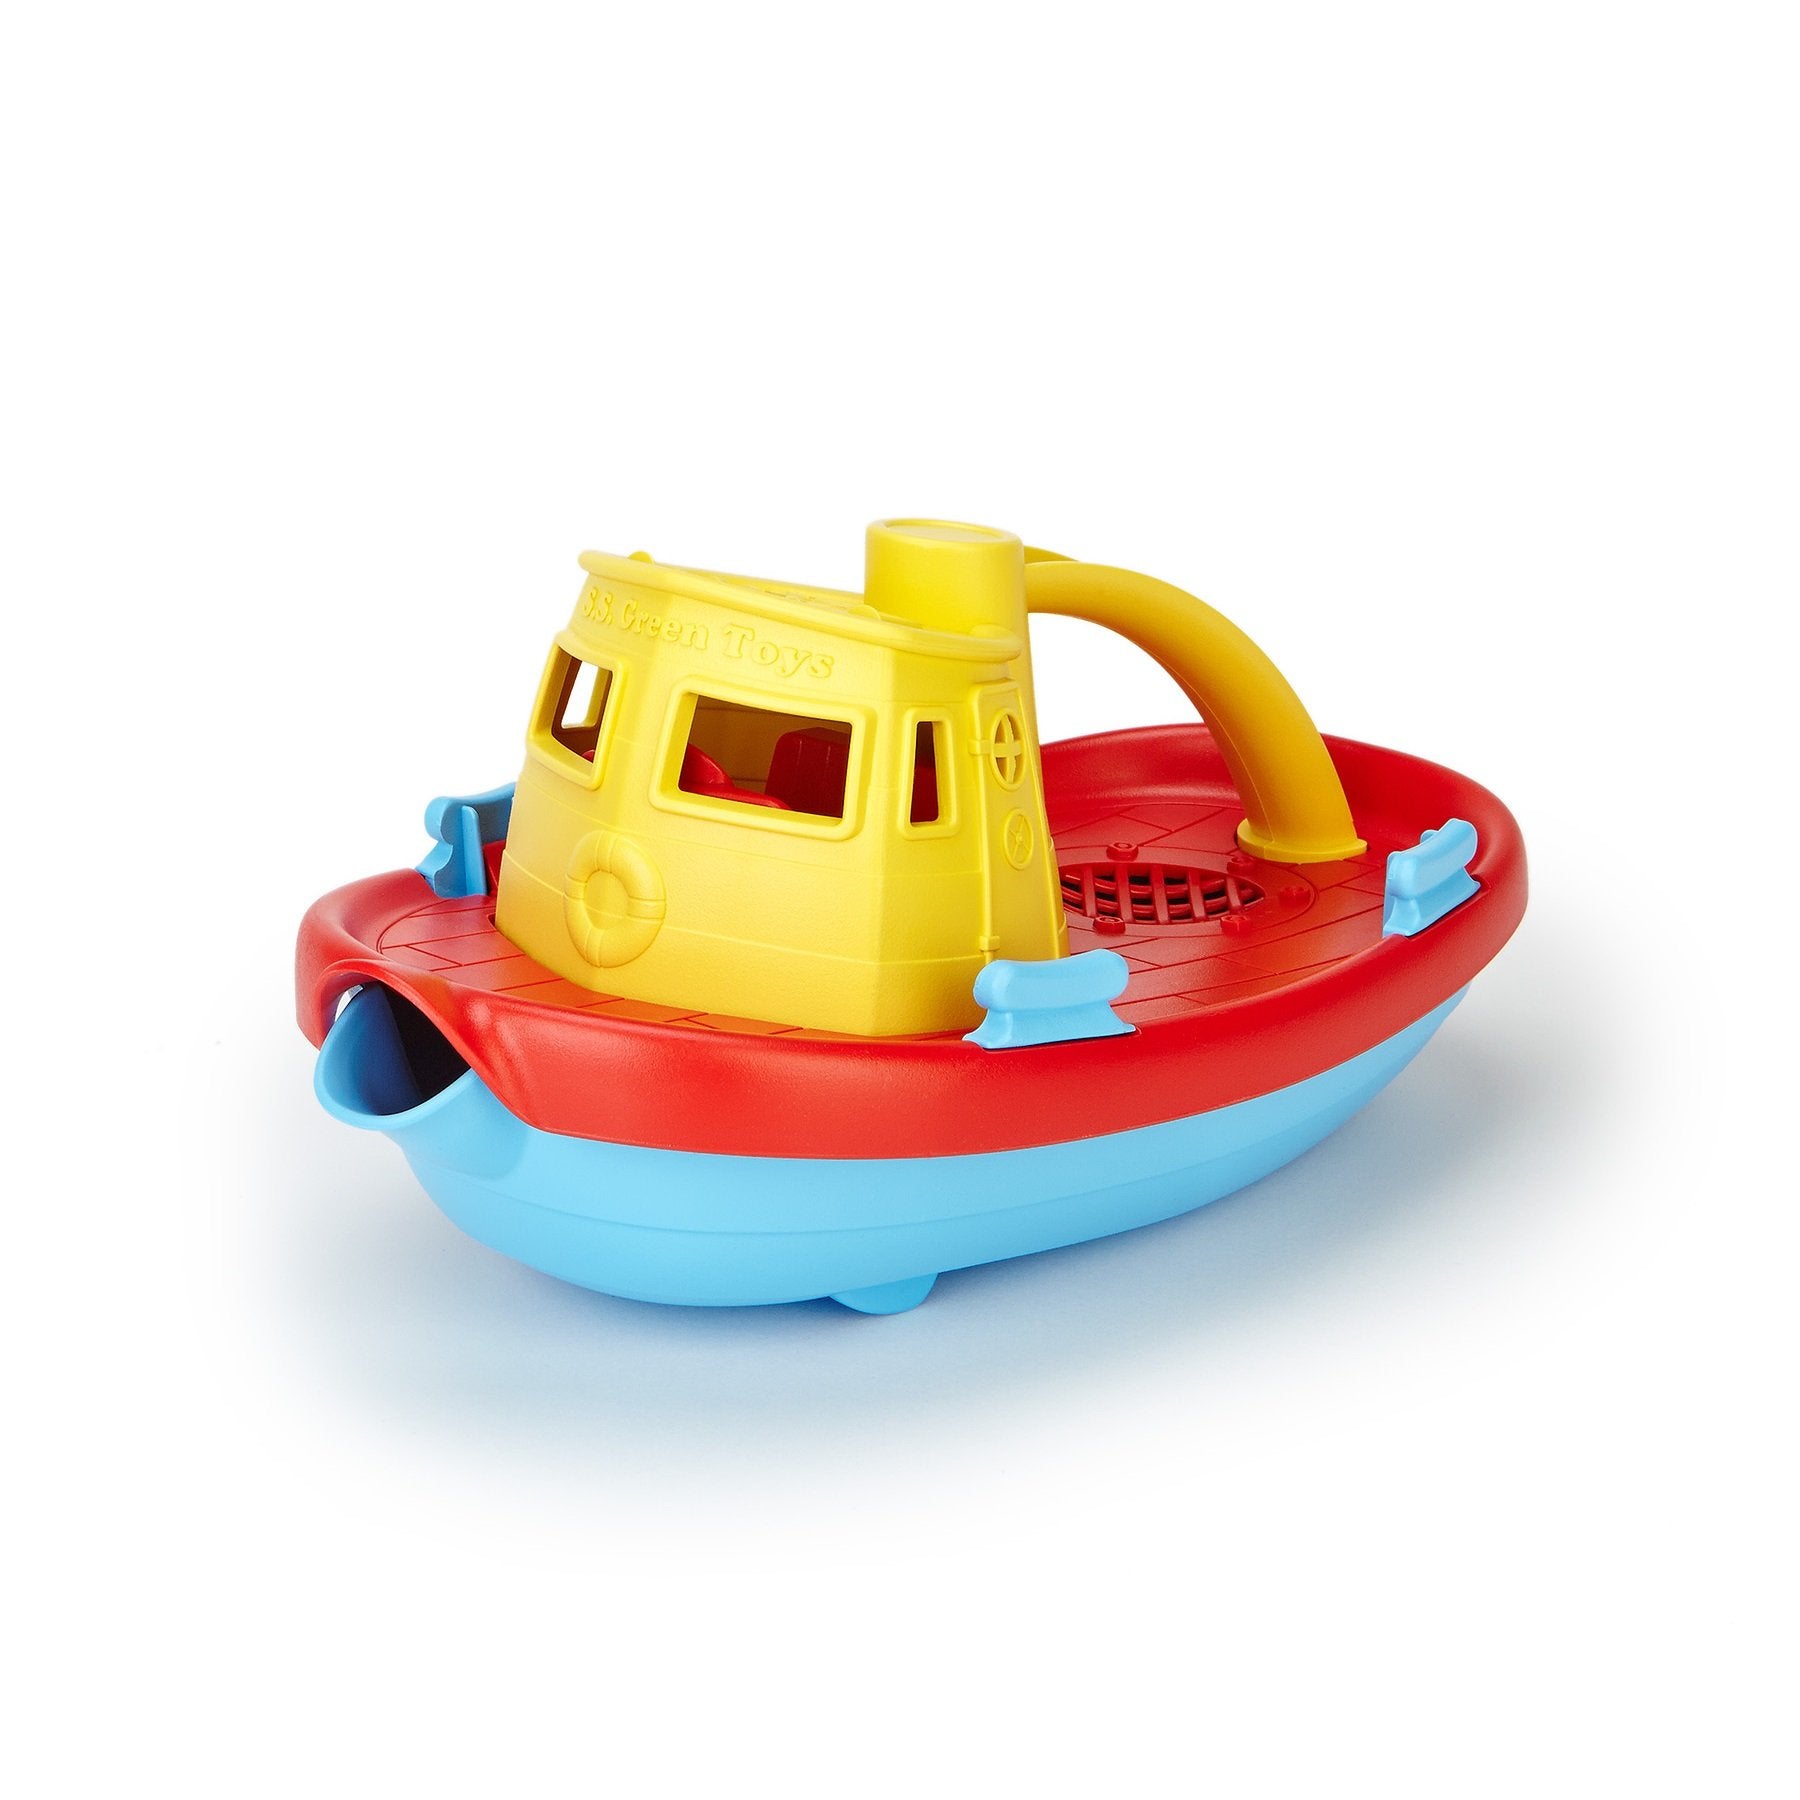 Green Toys Tug Boat - Bath and Pool Toy